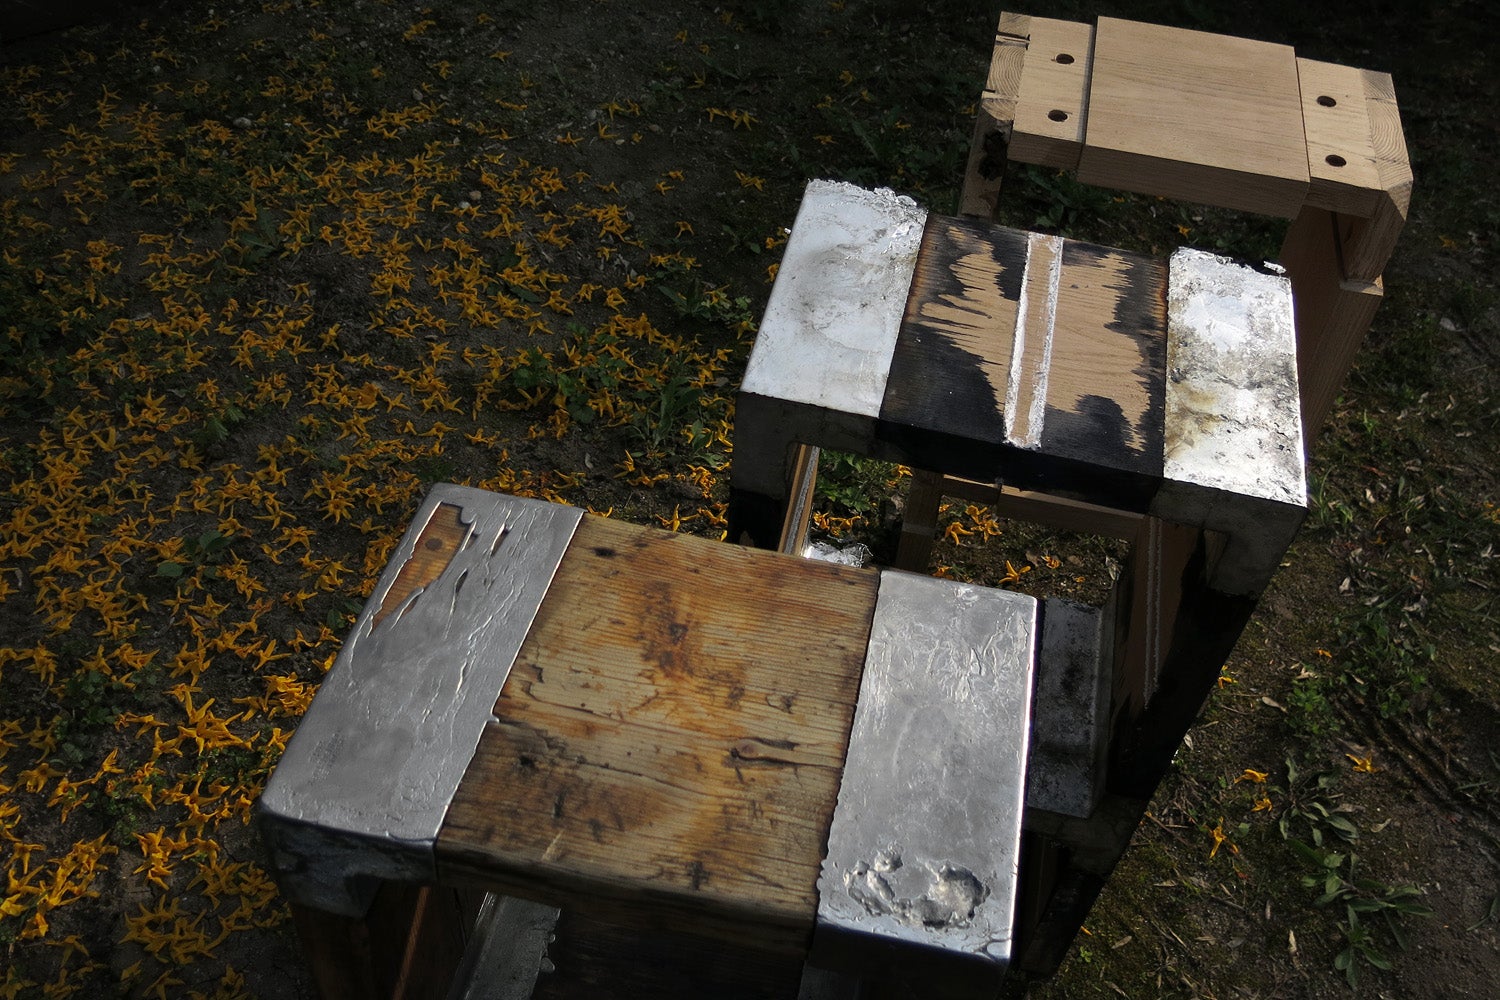 Casting Molten Metal On Wood With A Hungarian Design Master | Gizmodo Australia